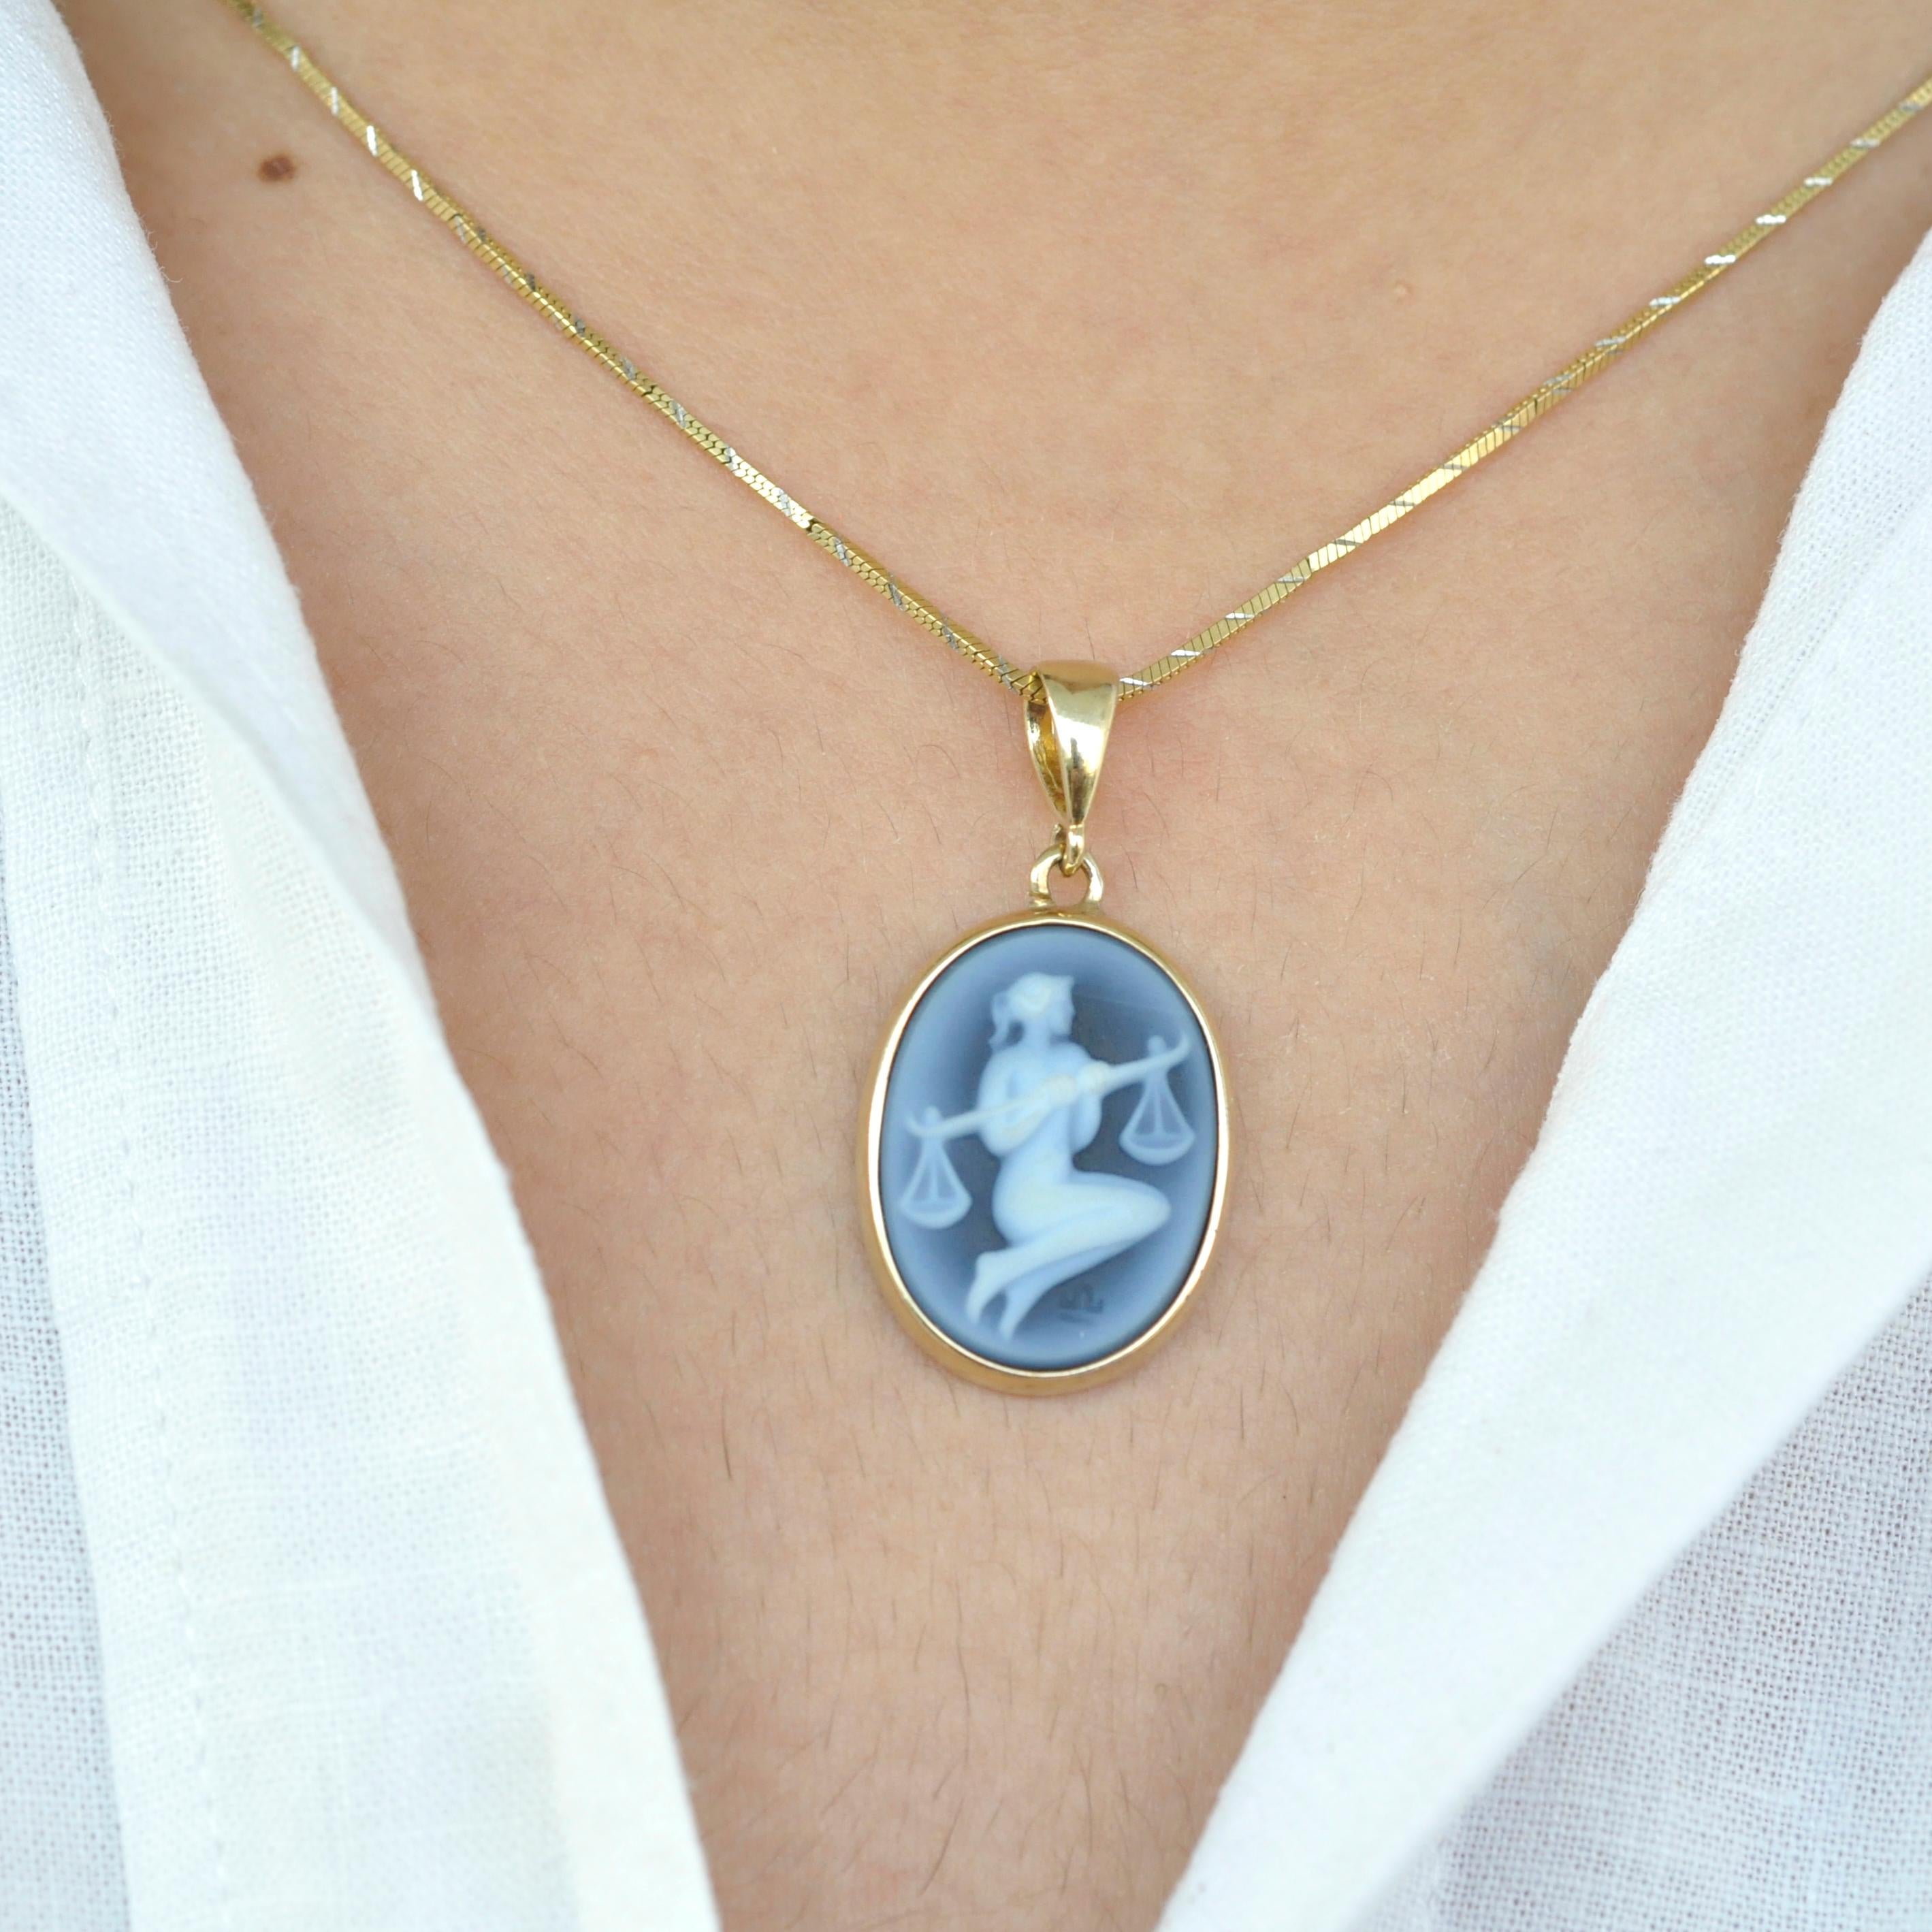 Introducing the enchanting Libra Zodiac Carving Cameo Pendant Necklace from our Zodiac Collection. This exquisite necklace features a meticulously crafted cameo made by an expert cameo engraver in Germany. The cameo is skillfully engraved on a